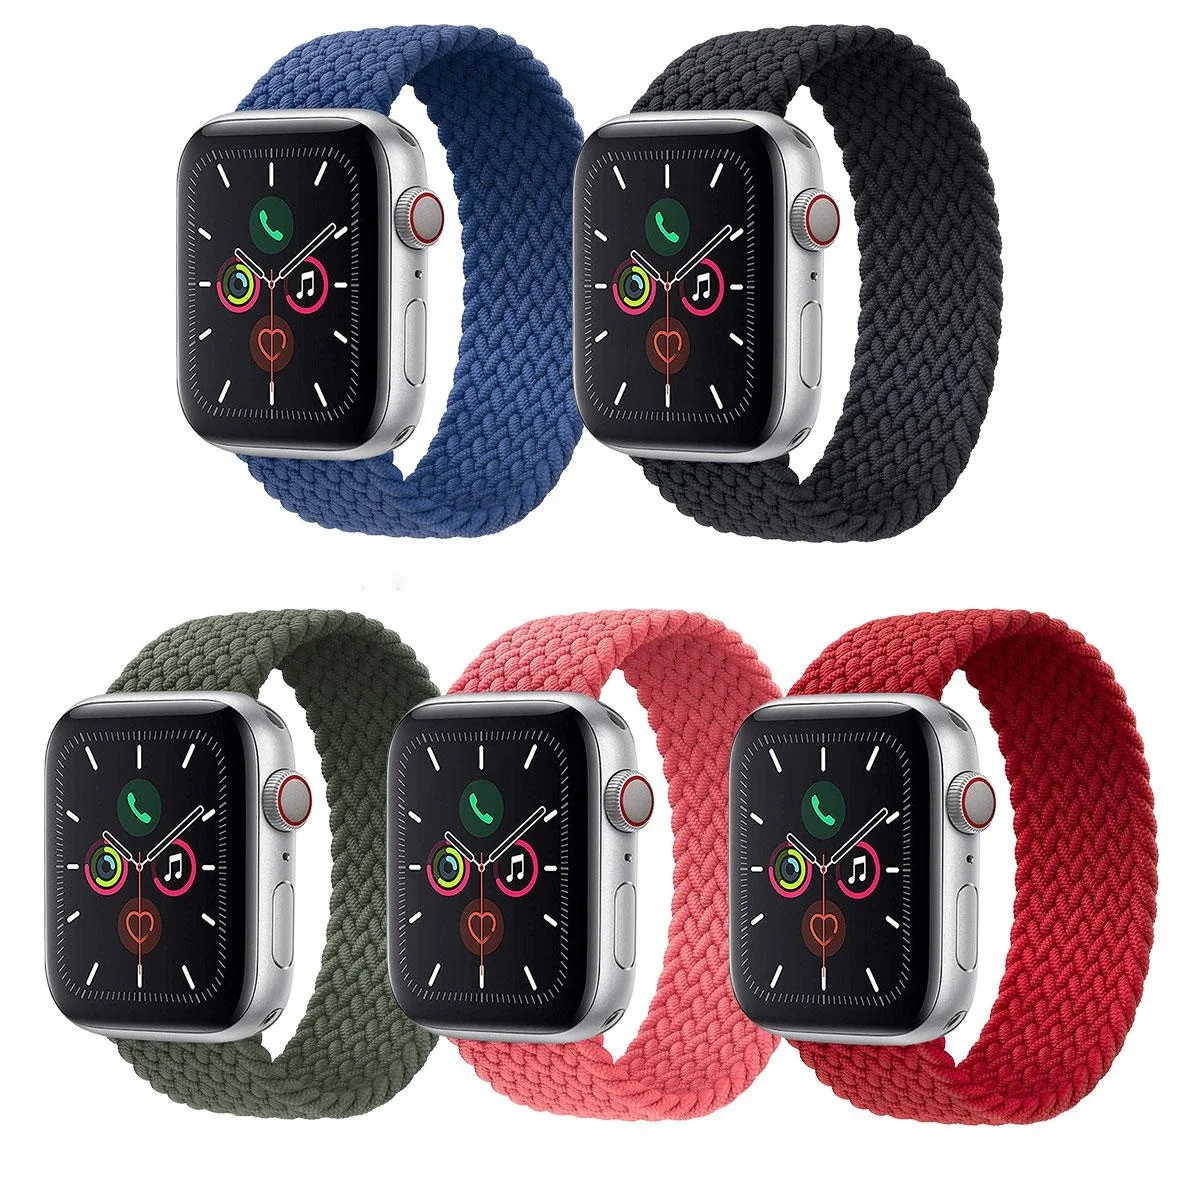 

New Arrival Fabric Watch Band SE Series 5/4/3/2/1 Solo Loop Braided Band Woven for Apple Watch, Optional